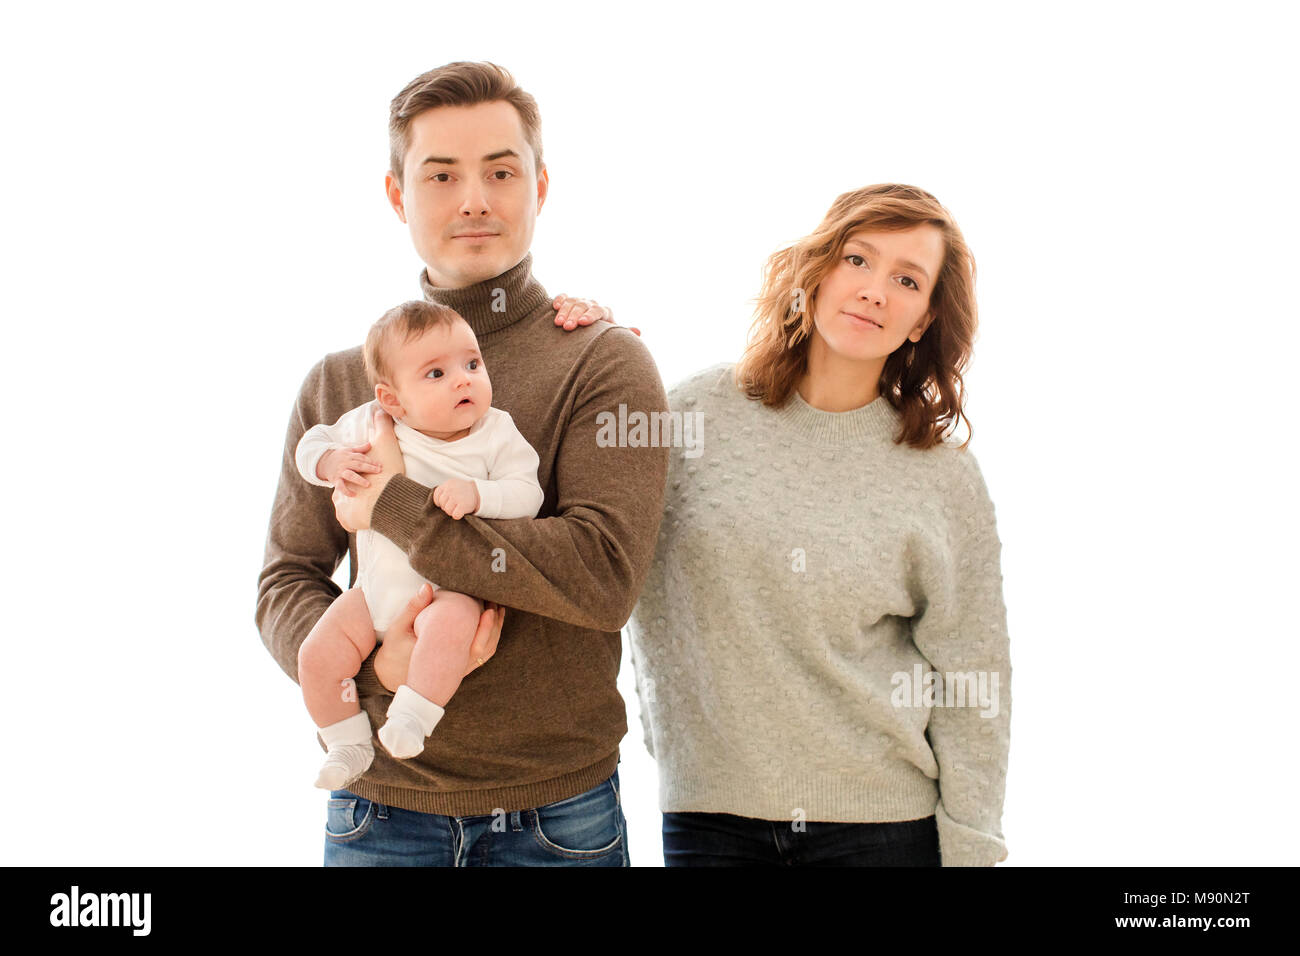 Young family with small child Stock Photo